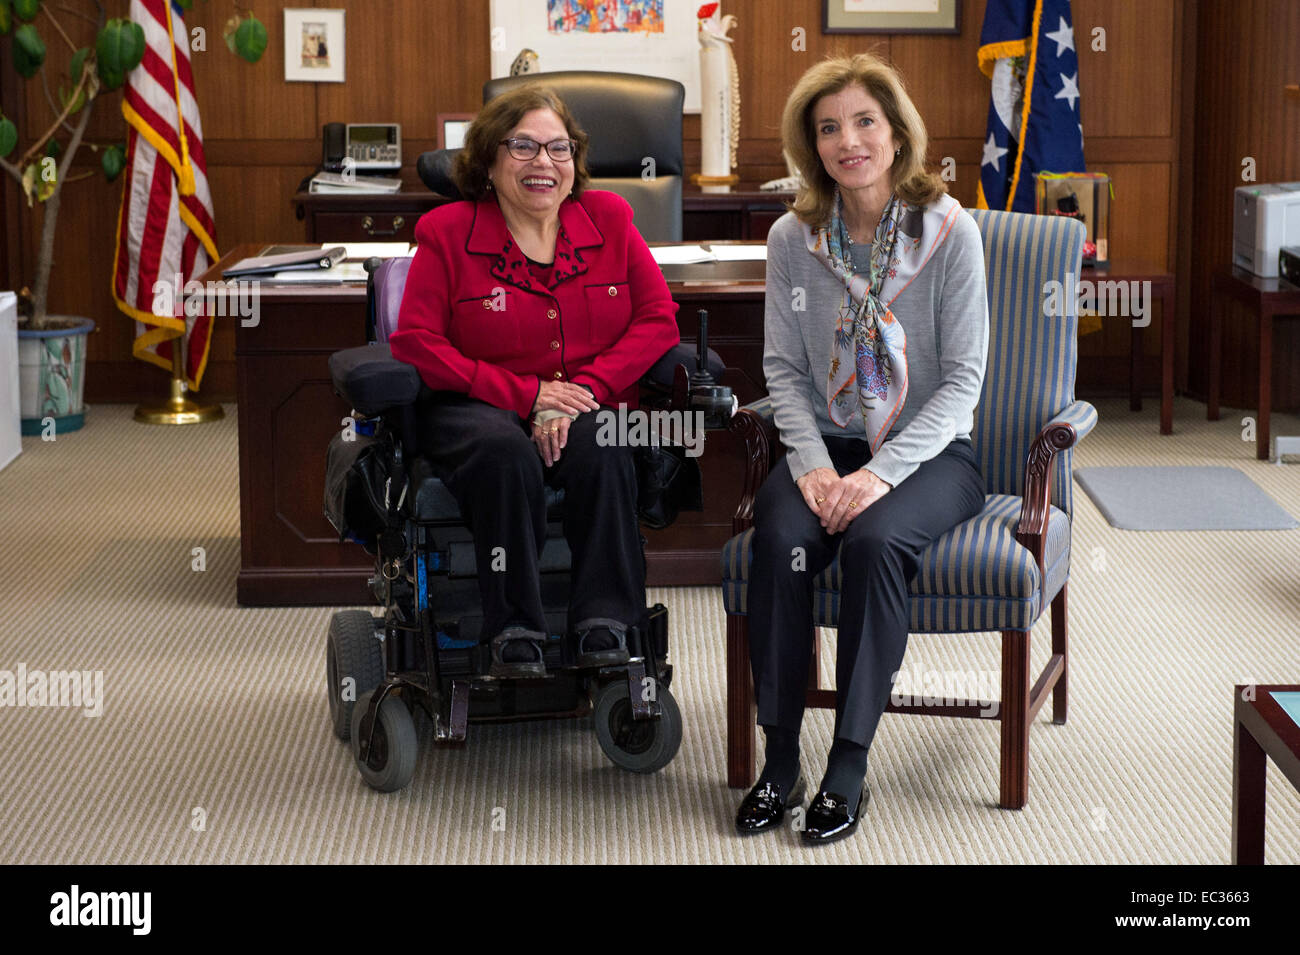 U.S. Ambassador to Japan Caroline Kennedy welcomes Special Advisor for International Disability Rights Judith Heumann to Tokyo, Japan, on December 4, 2014. Special Advisor Heumann is visiting Japan to discuss disability rights and initiatives during the country’s Disability Week. Stock Photo